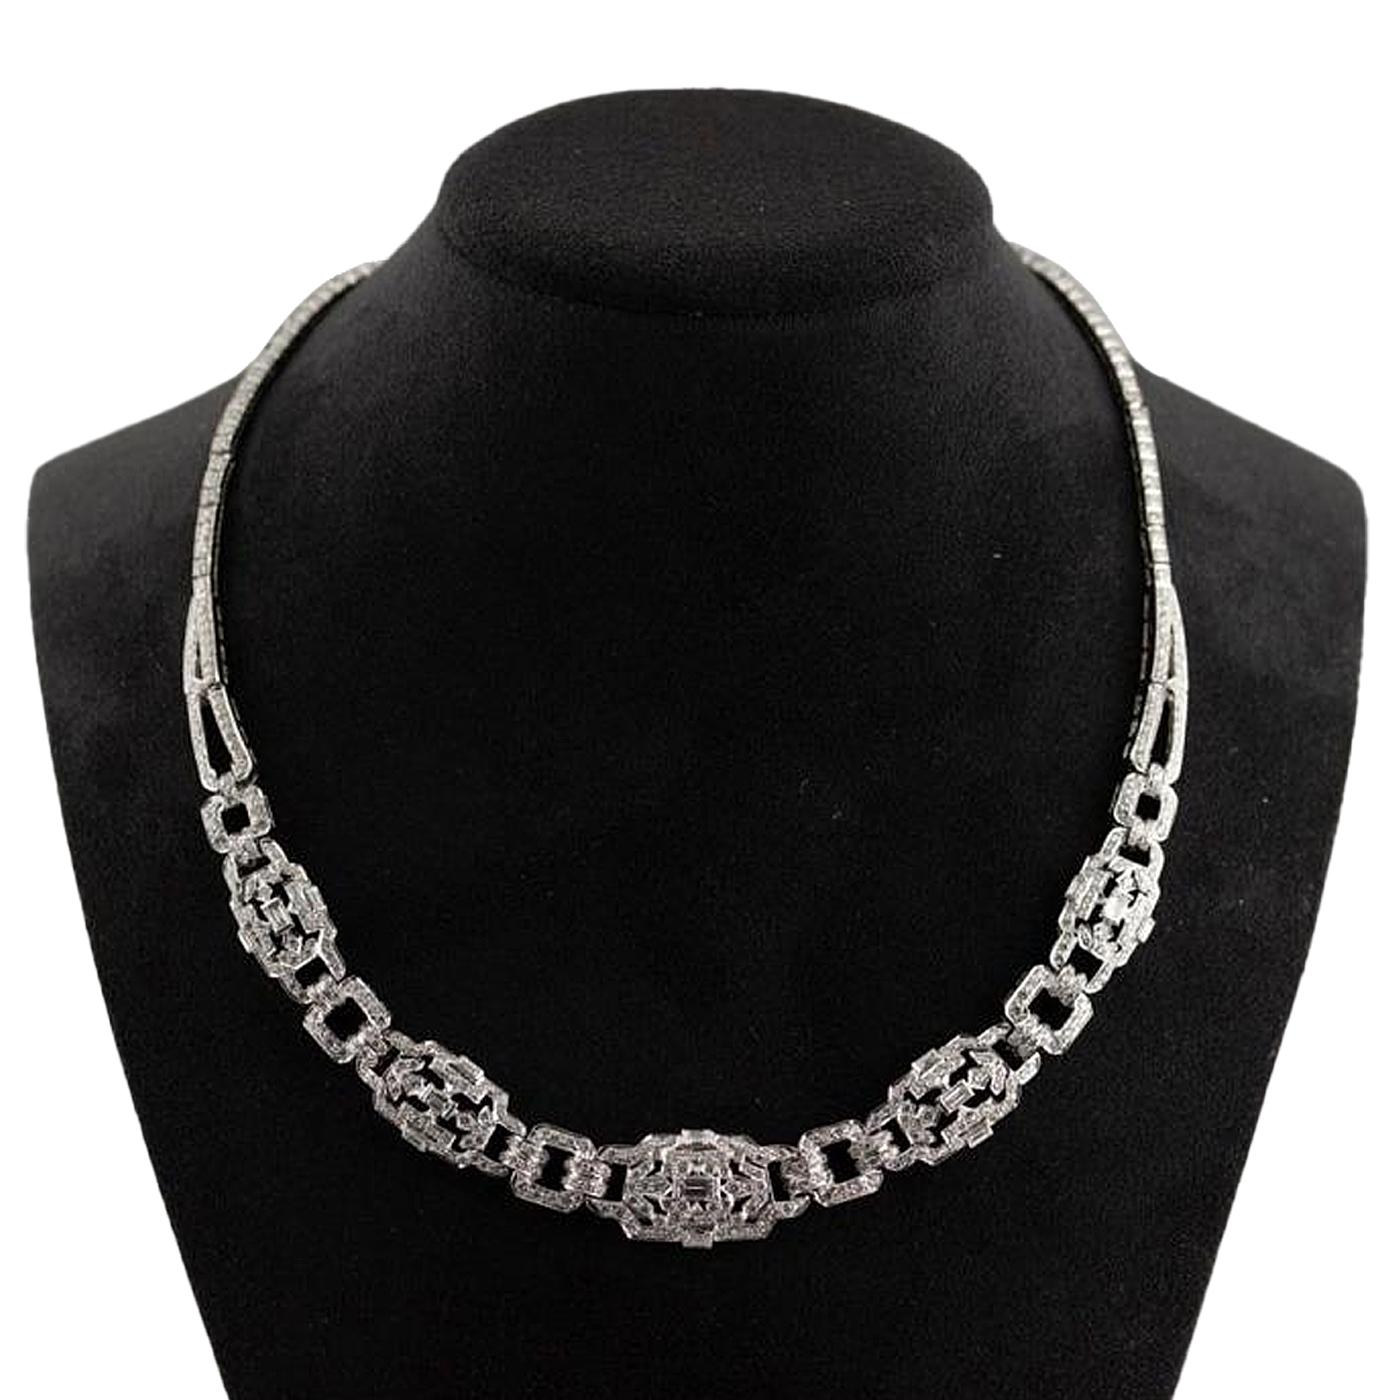 A Fabulous ArtDeco Necklace that makes a statement on its own, This 12.85ctw diamond necklace features Round and Emerald cut diamonds to create a stunning, shimmering effect. The diamonds are set in Platinum. Diamond color is F color, Diamond